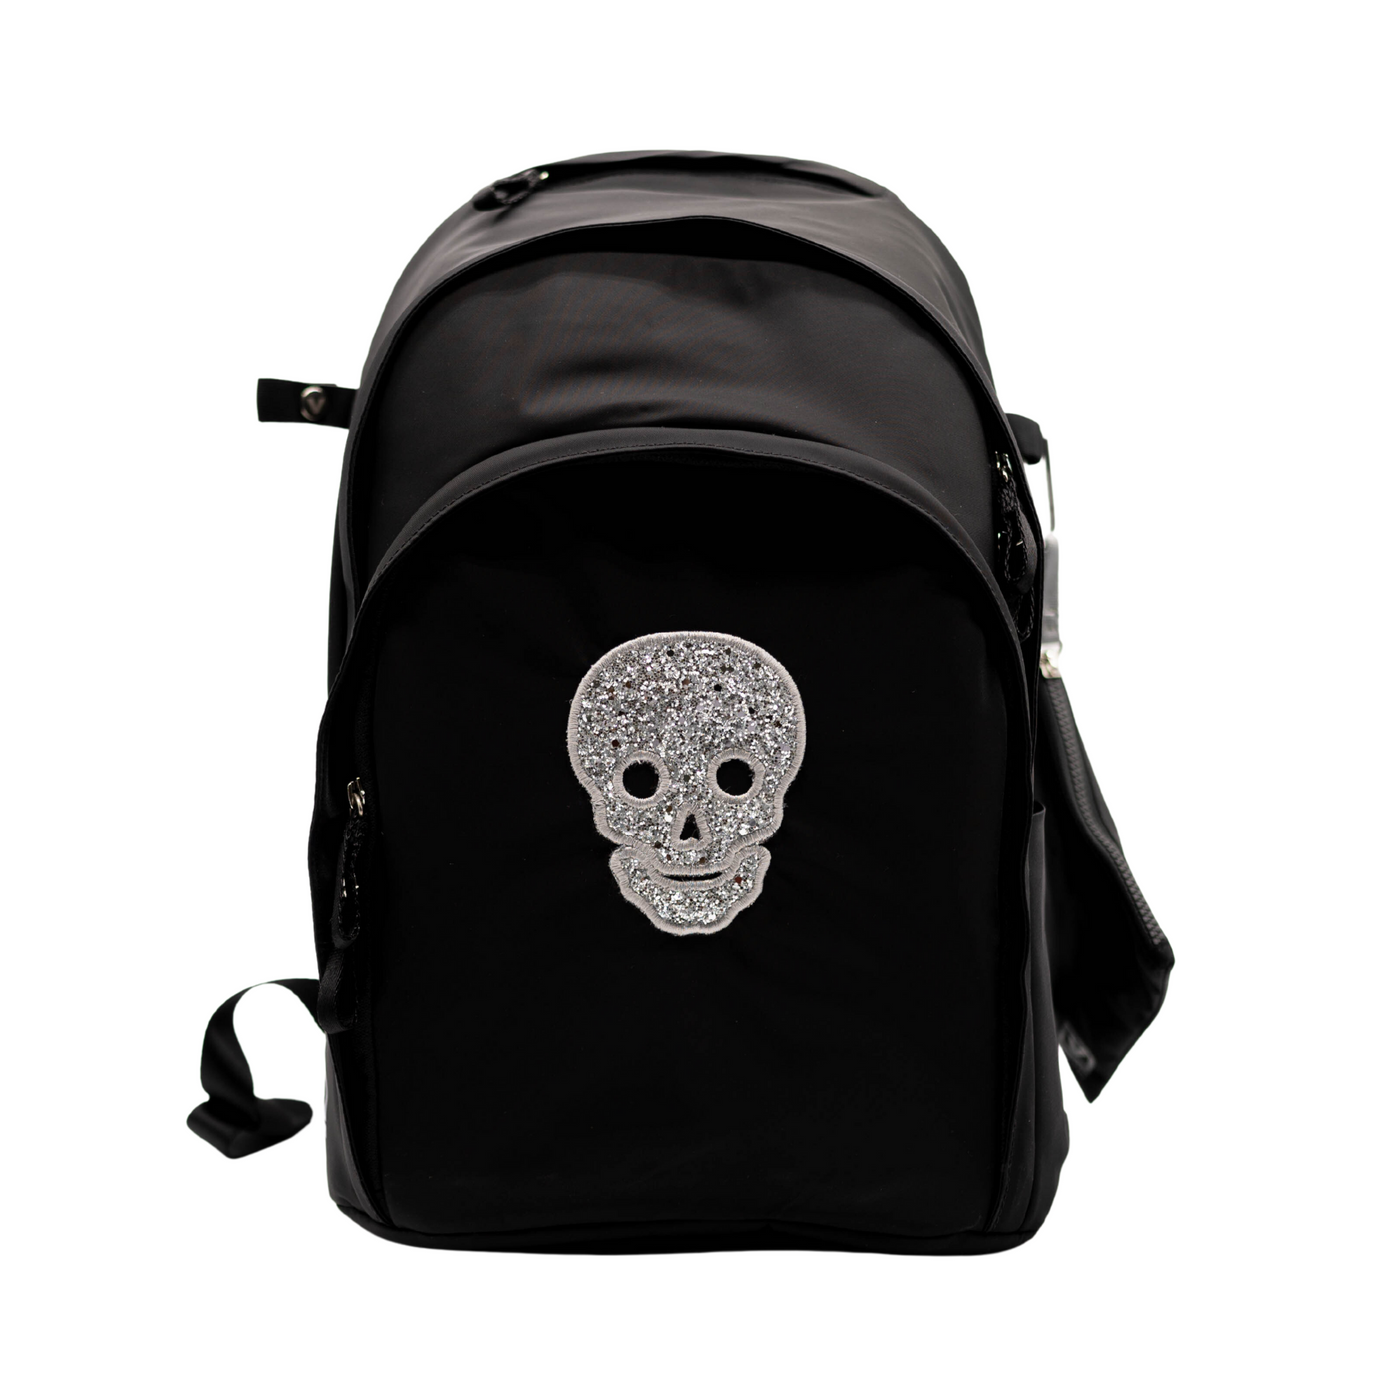 Novelty Delaire Backpack - “Skull” (custom embroidered - allow an additional 5 business days to ship)